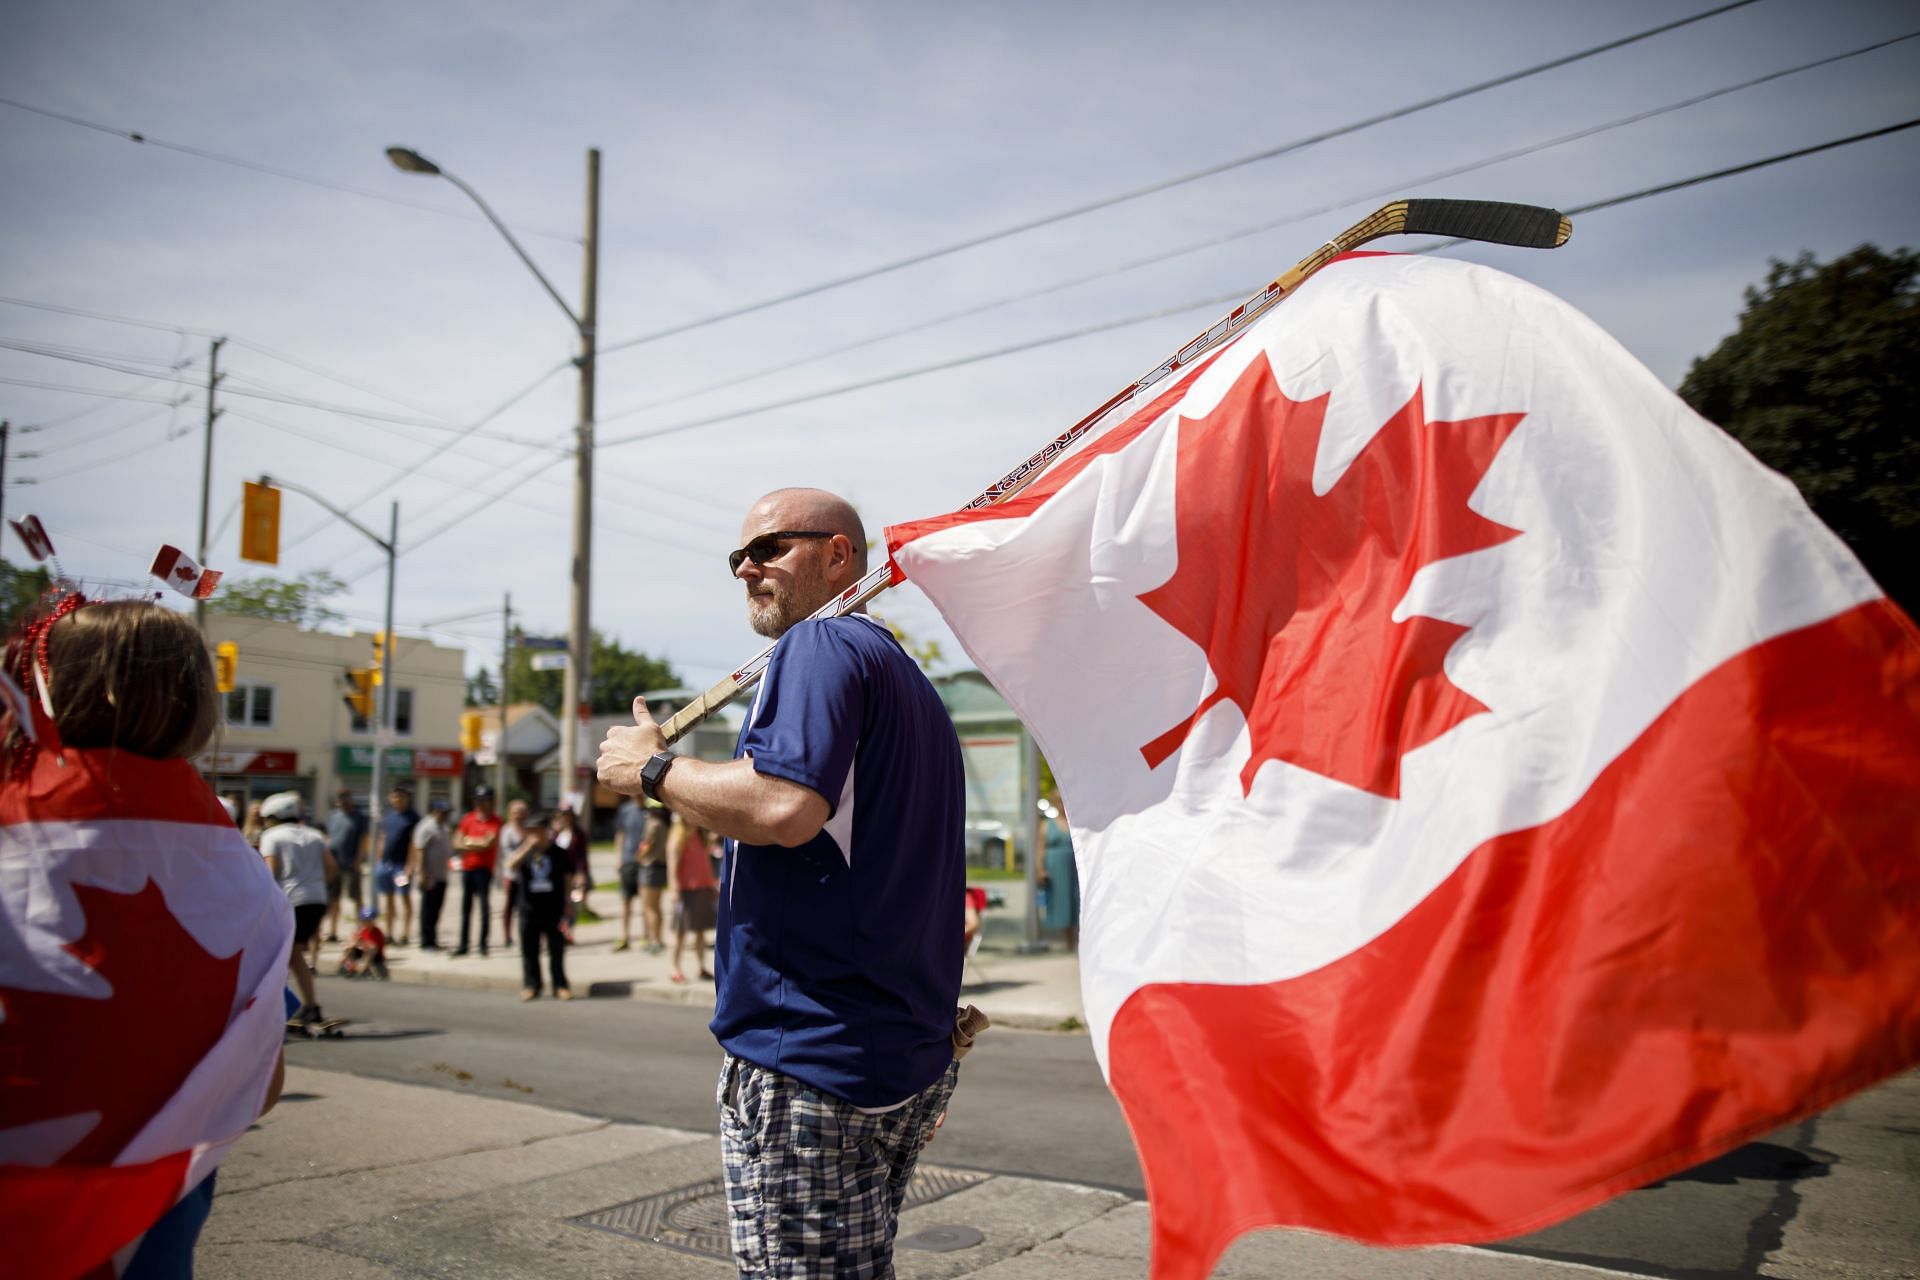 Toronto Celebrates Canada Day With Parade And Fireworks